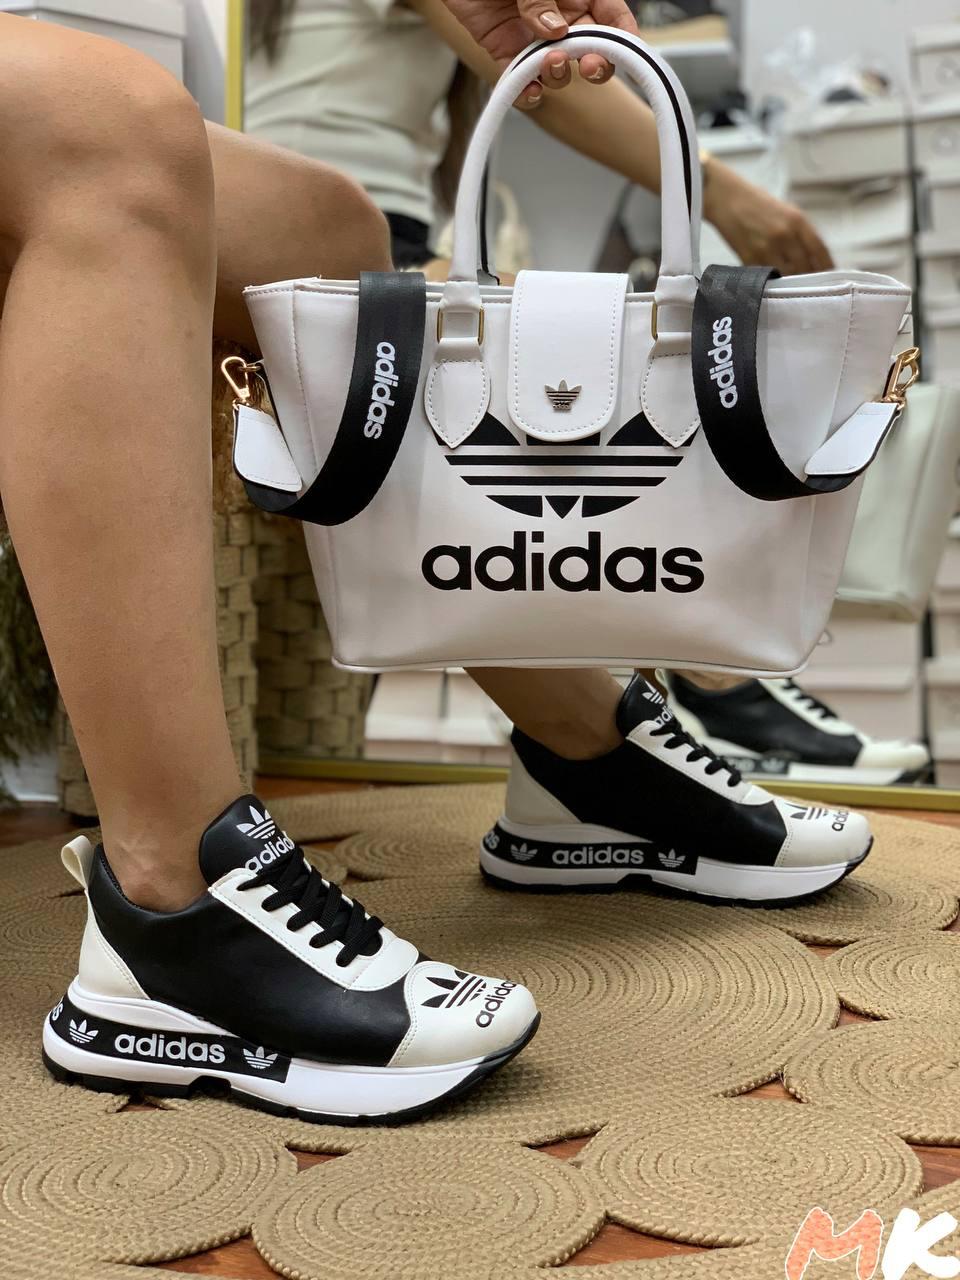 Adidas WIN Bag and Sneakers Set